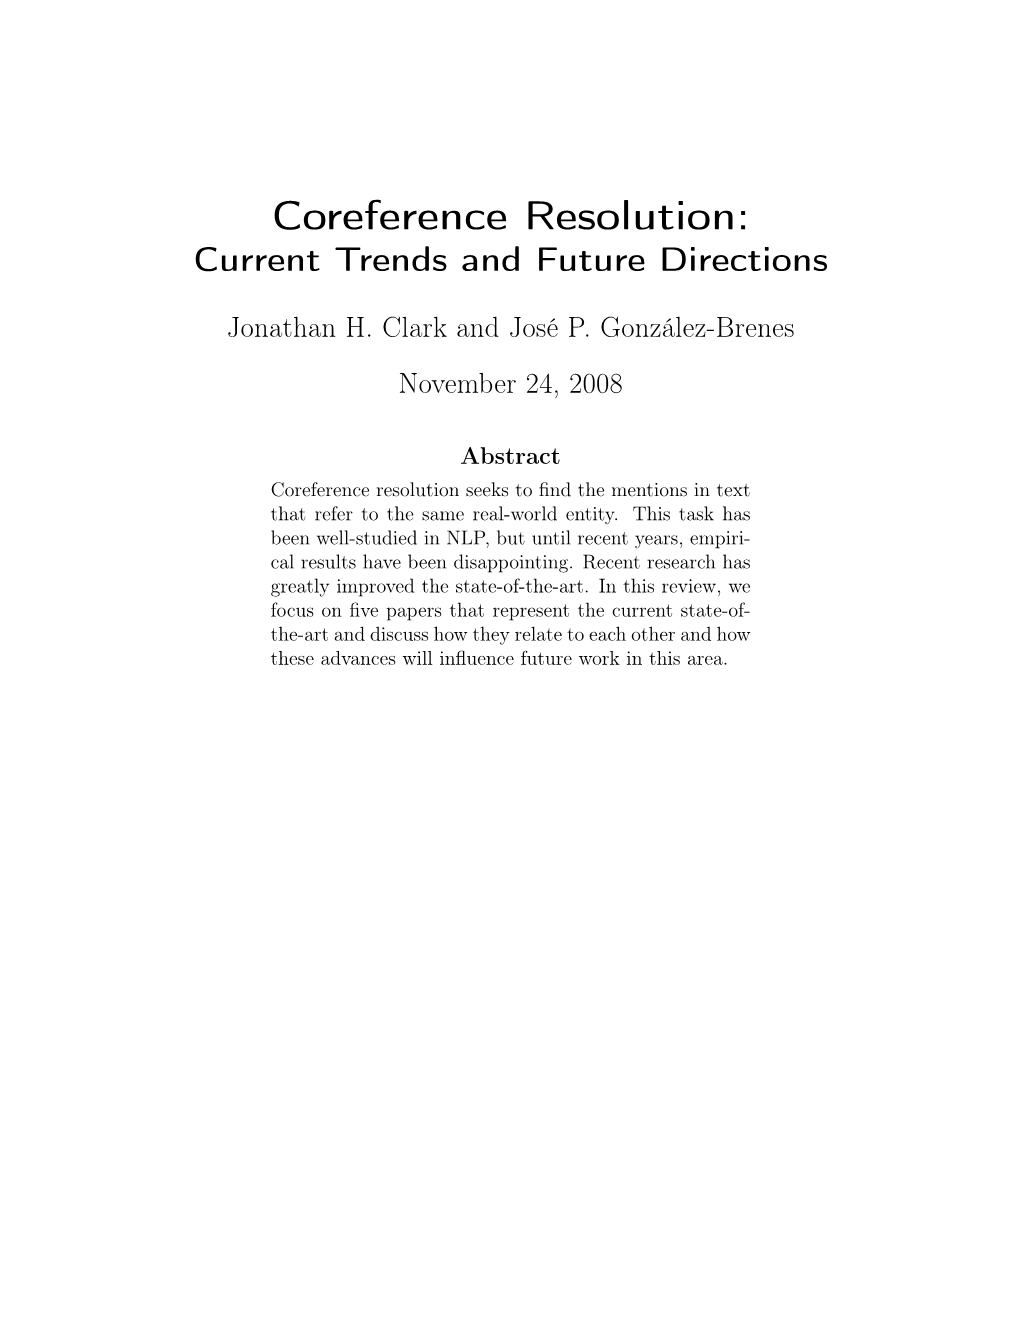 Coreference Resolution: Current Trends and Future Directions